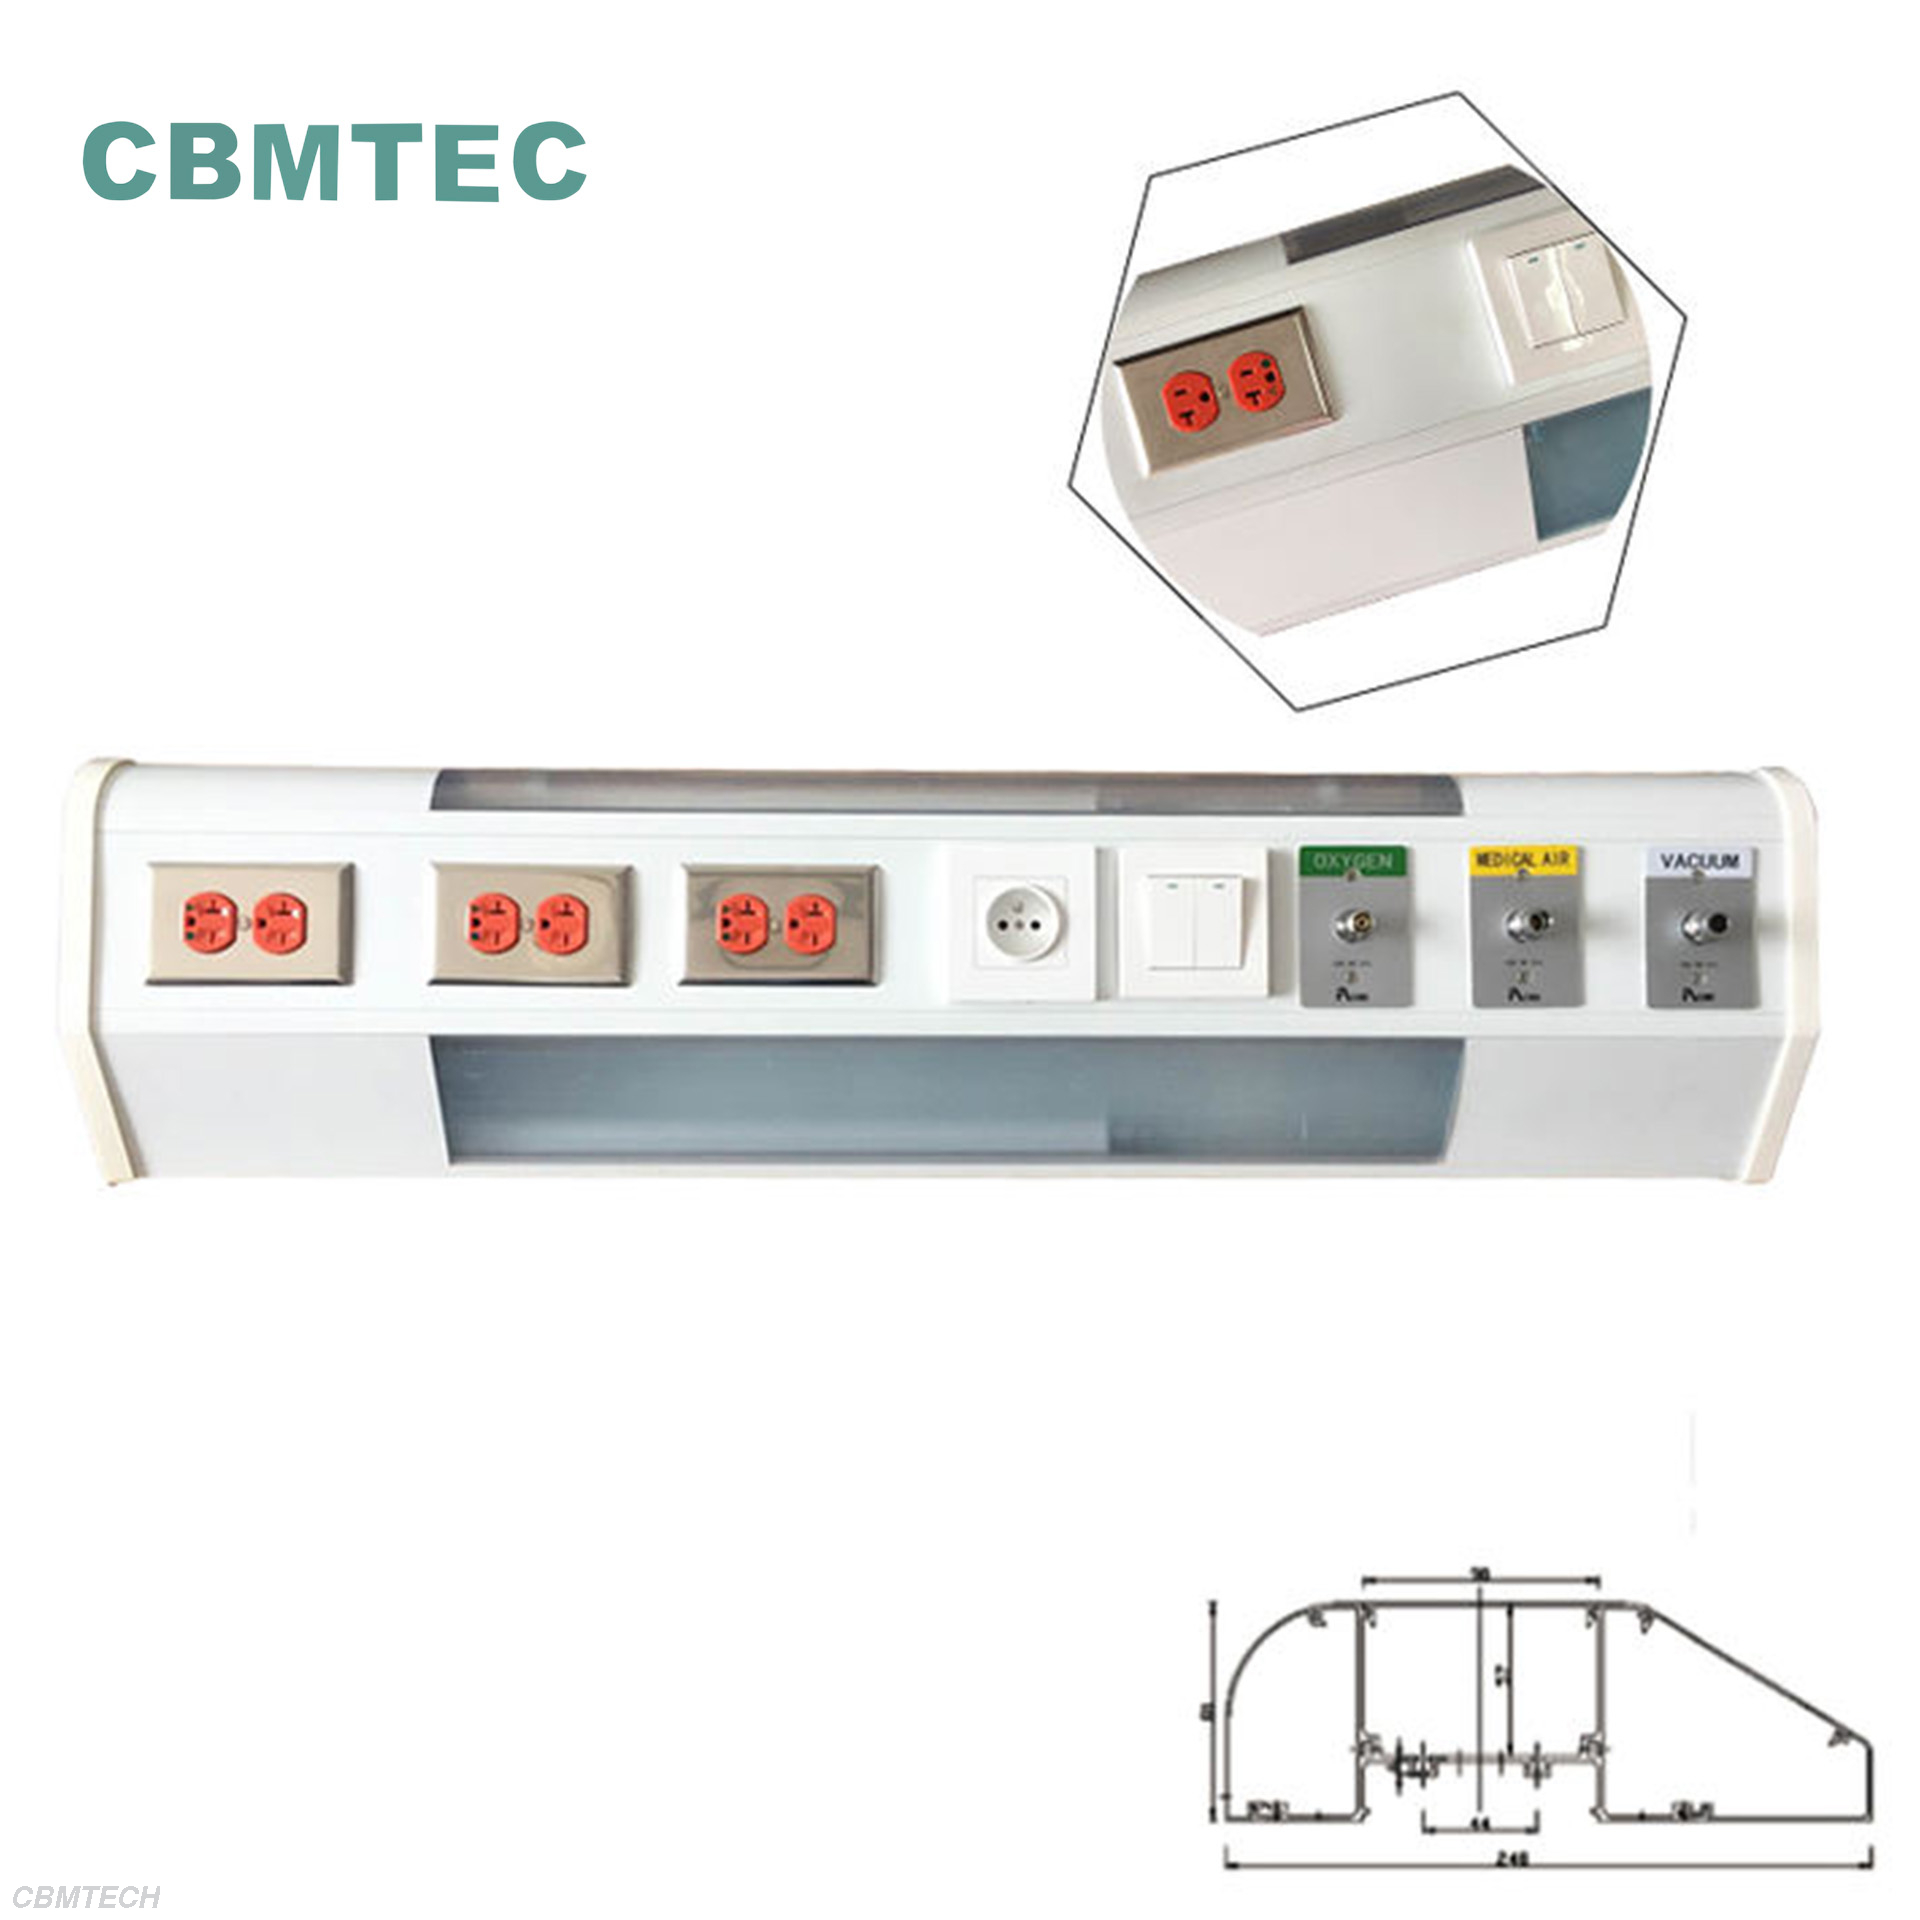 Medical Bedhead Trunking for ICU Wards 